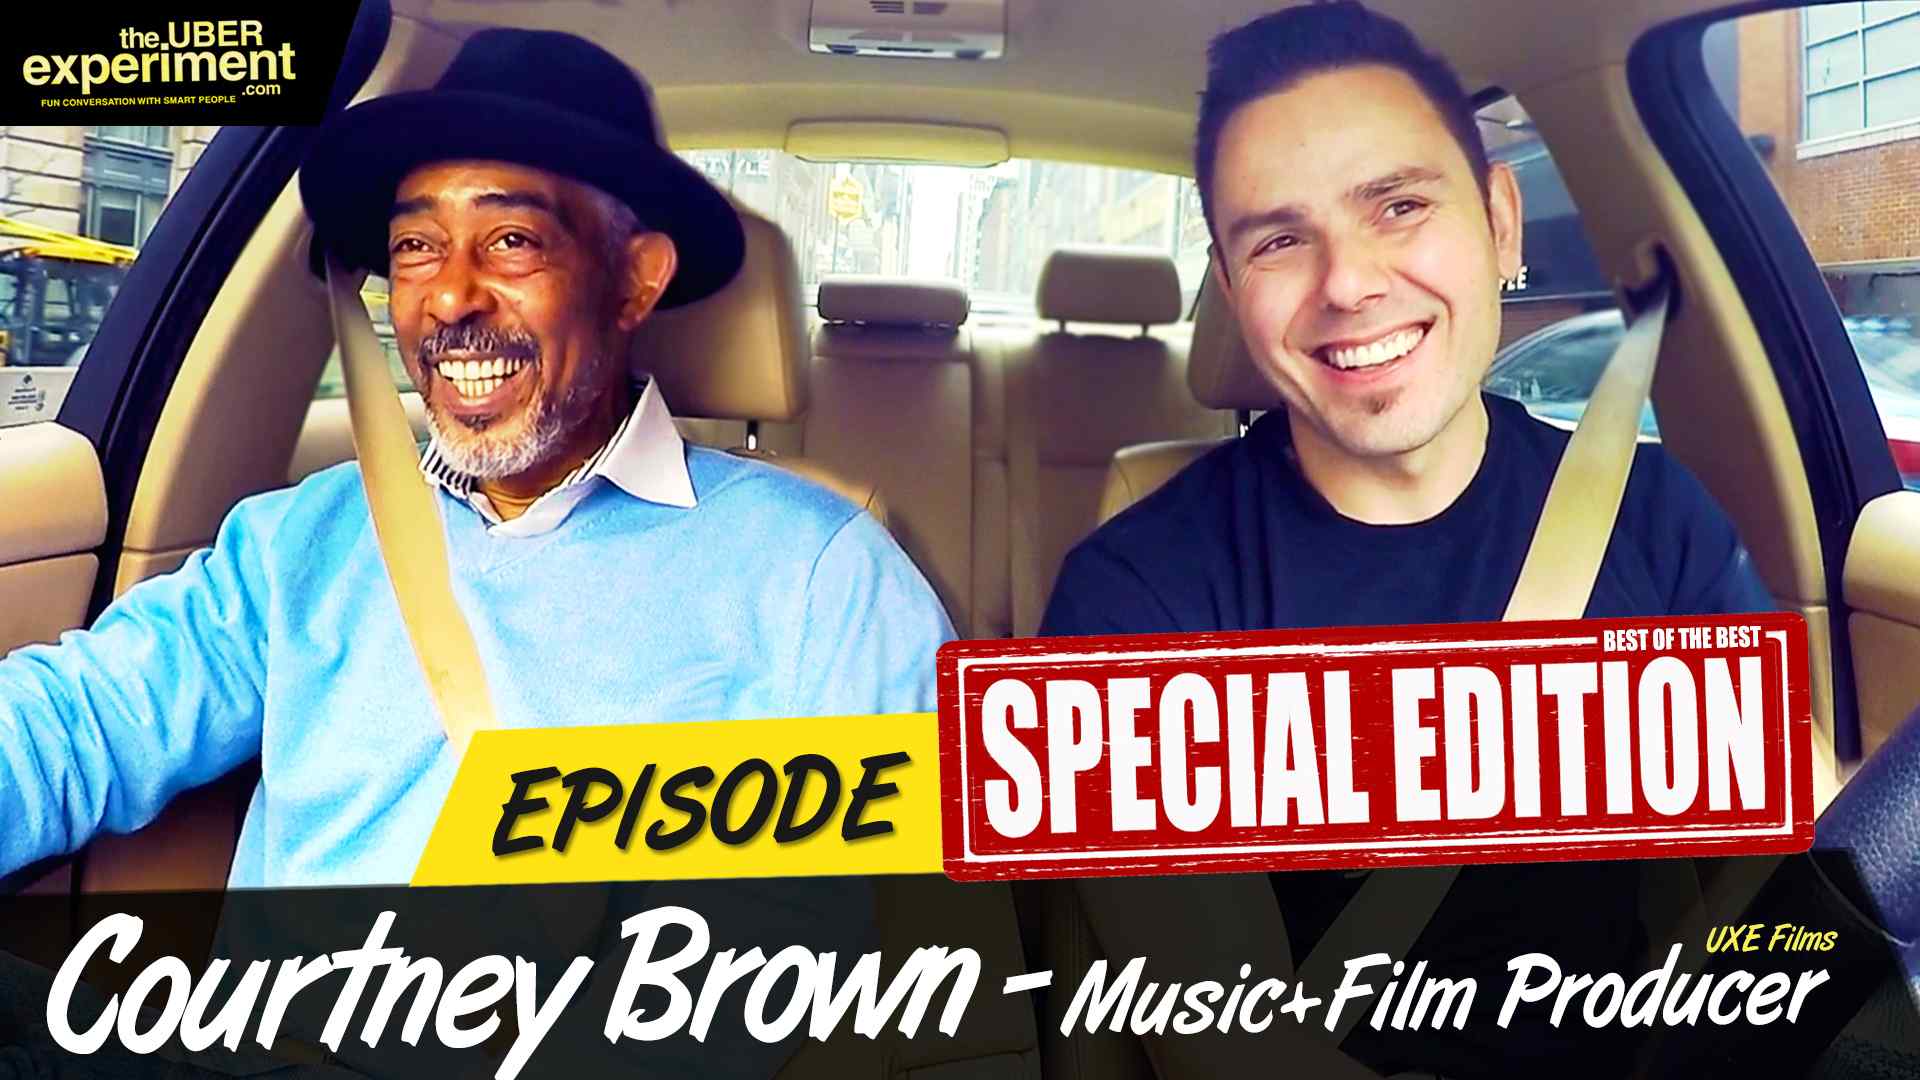 Music & Film Producer COURTNEY BROWN on The UBER Experiment Reality Talk Show - SPECIAL EDITION